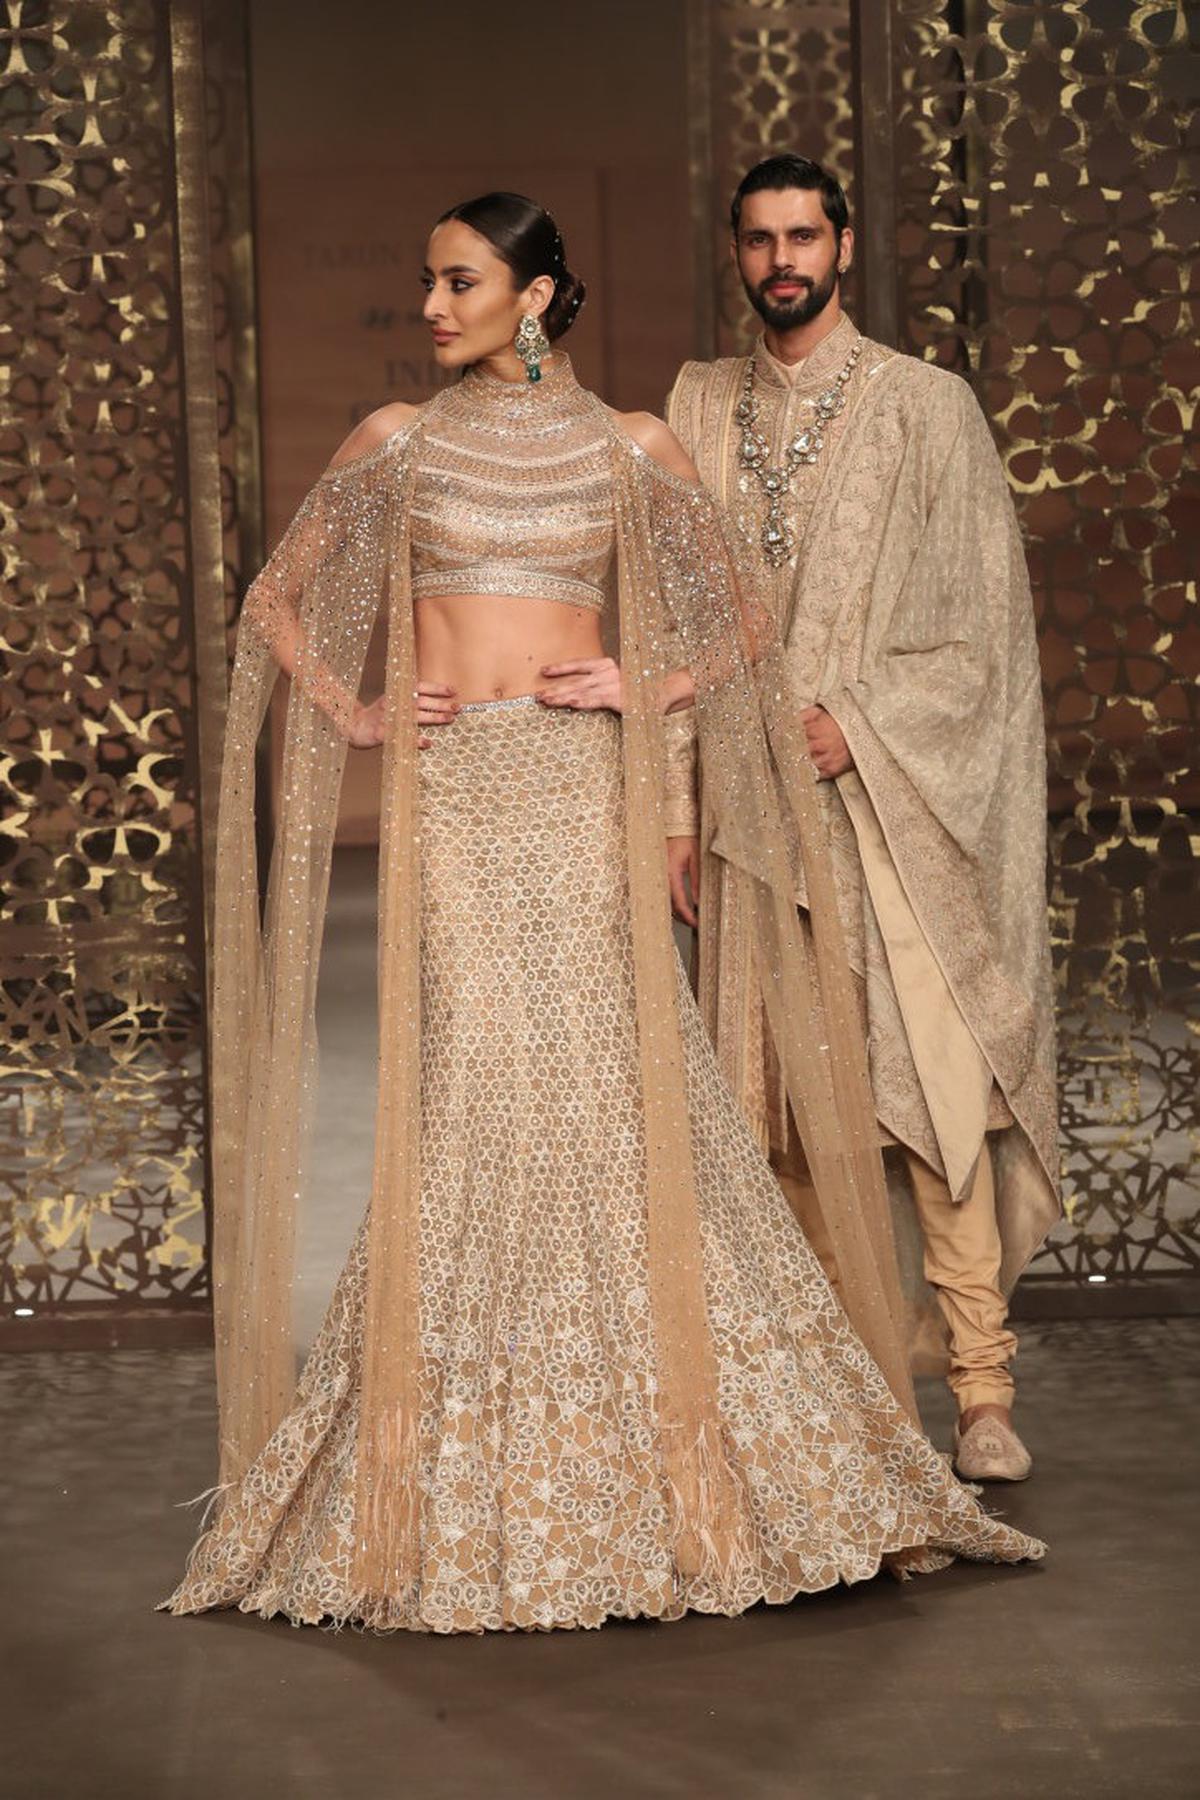 A snapshot from Tarun Tahiliani’s collection for India Couture Week 